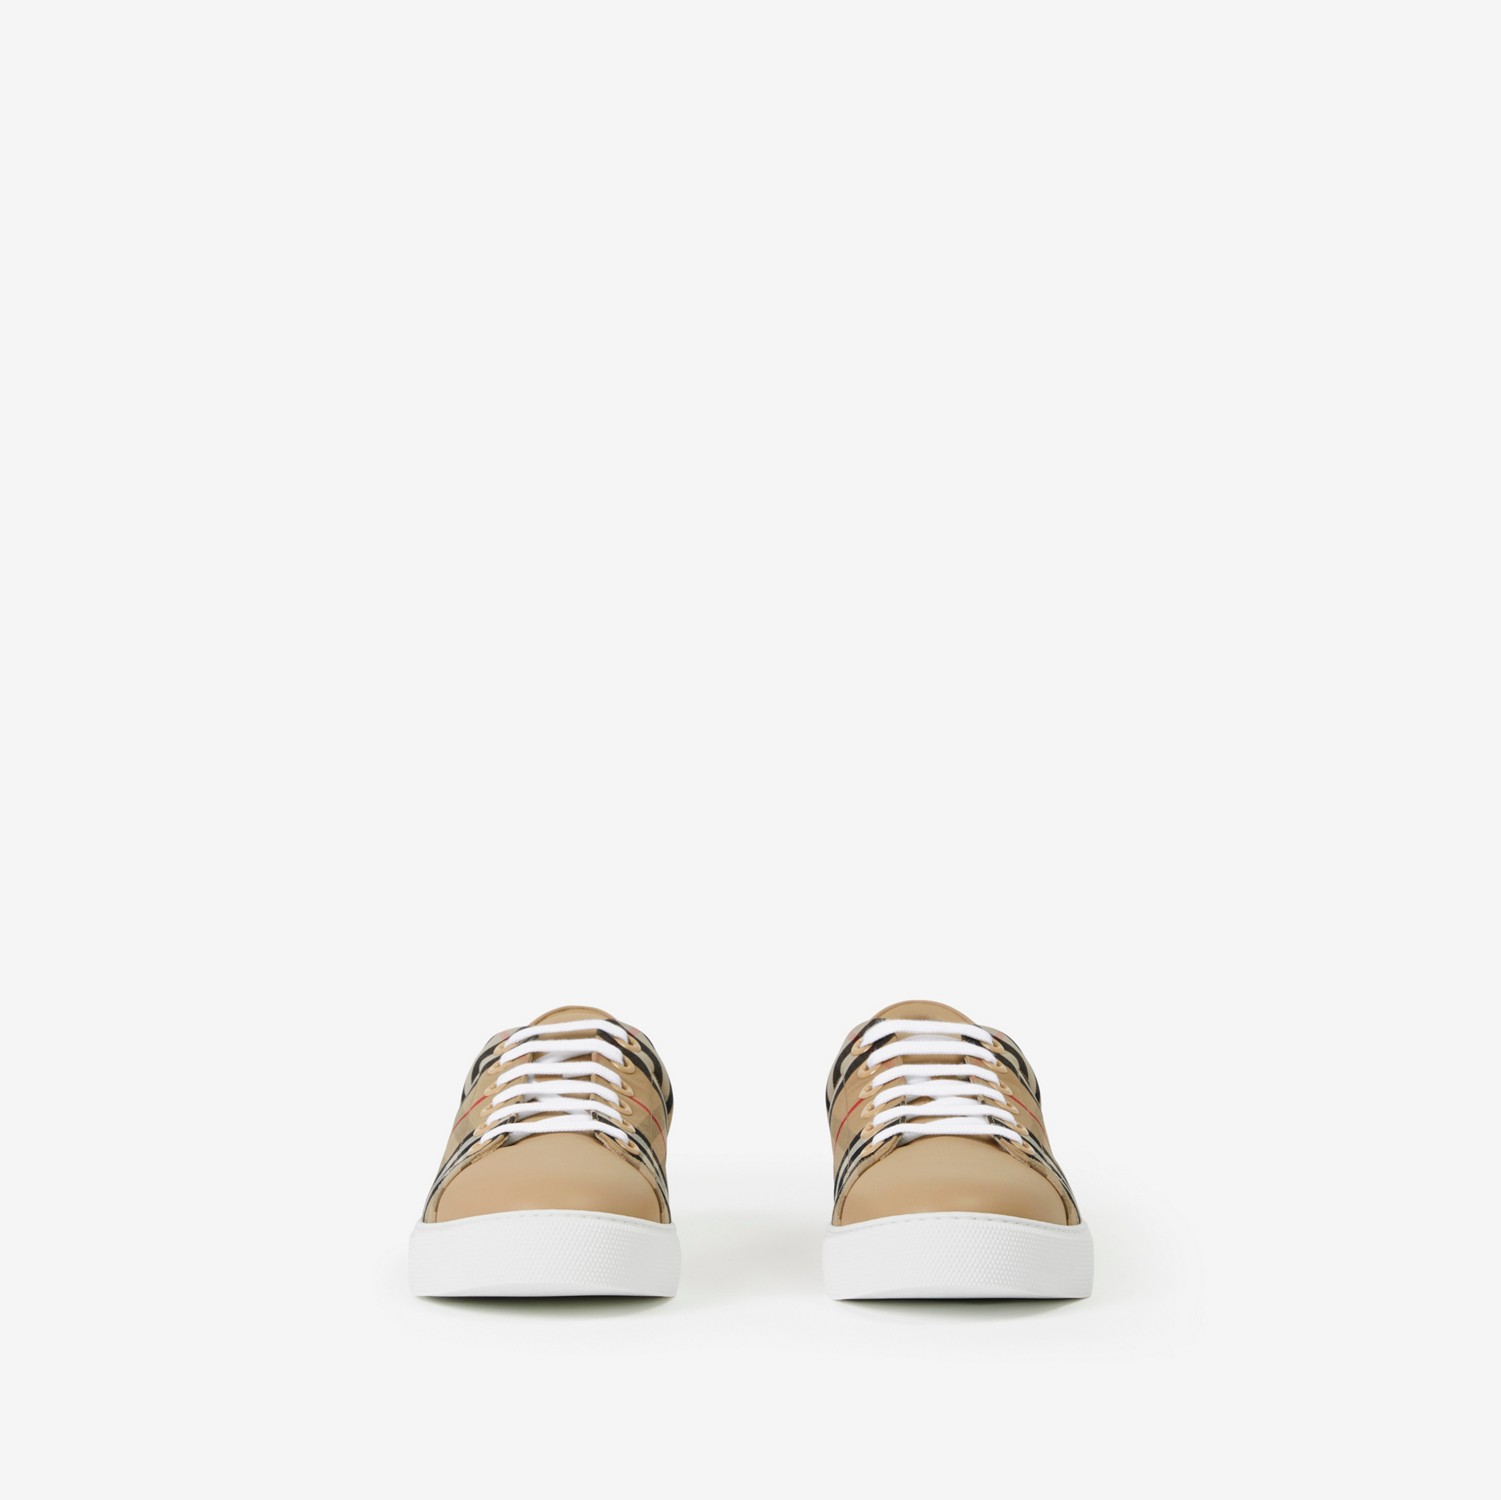 Vintage Check and Leather Sneakers in Archive Beige - Women | Burberry® Official